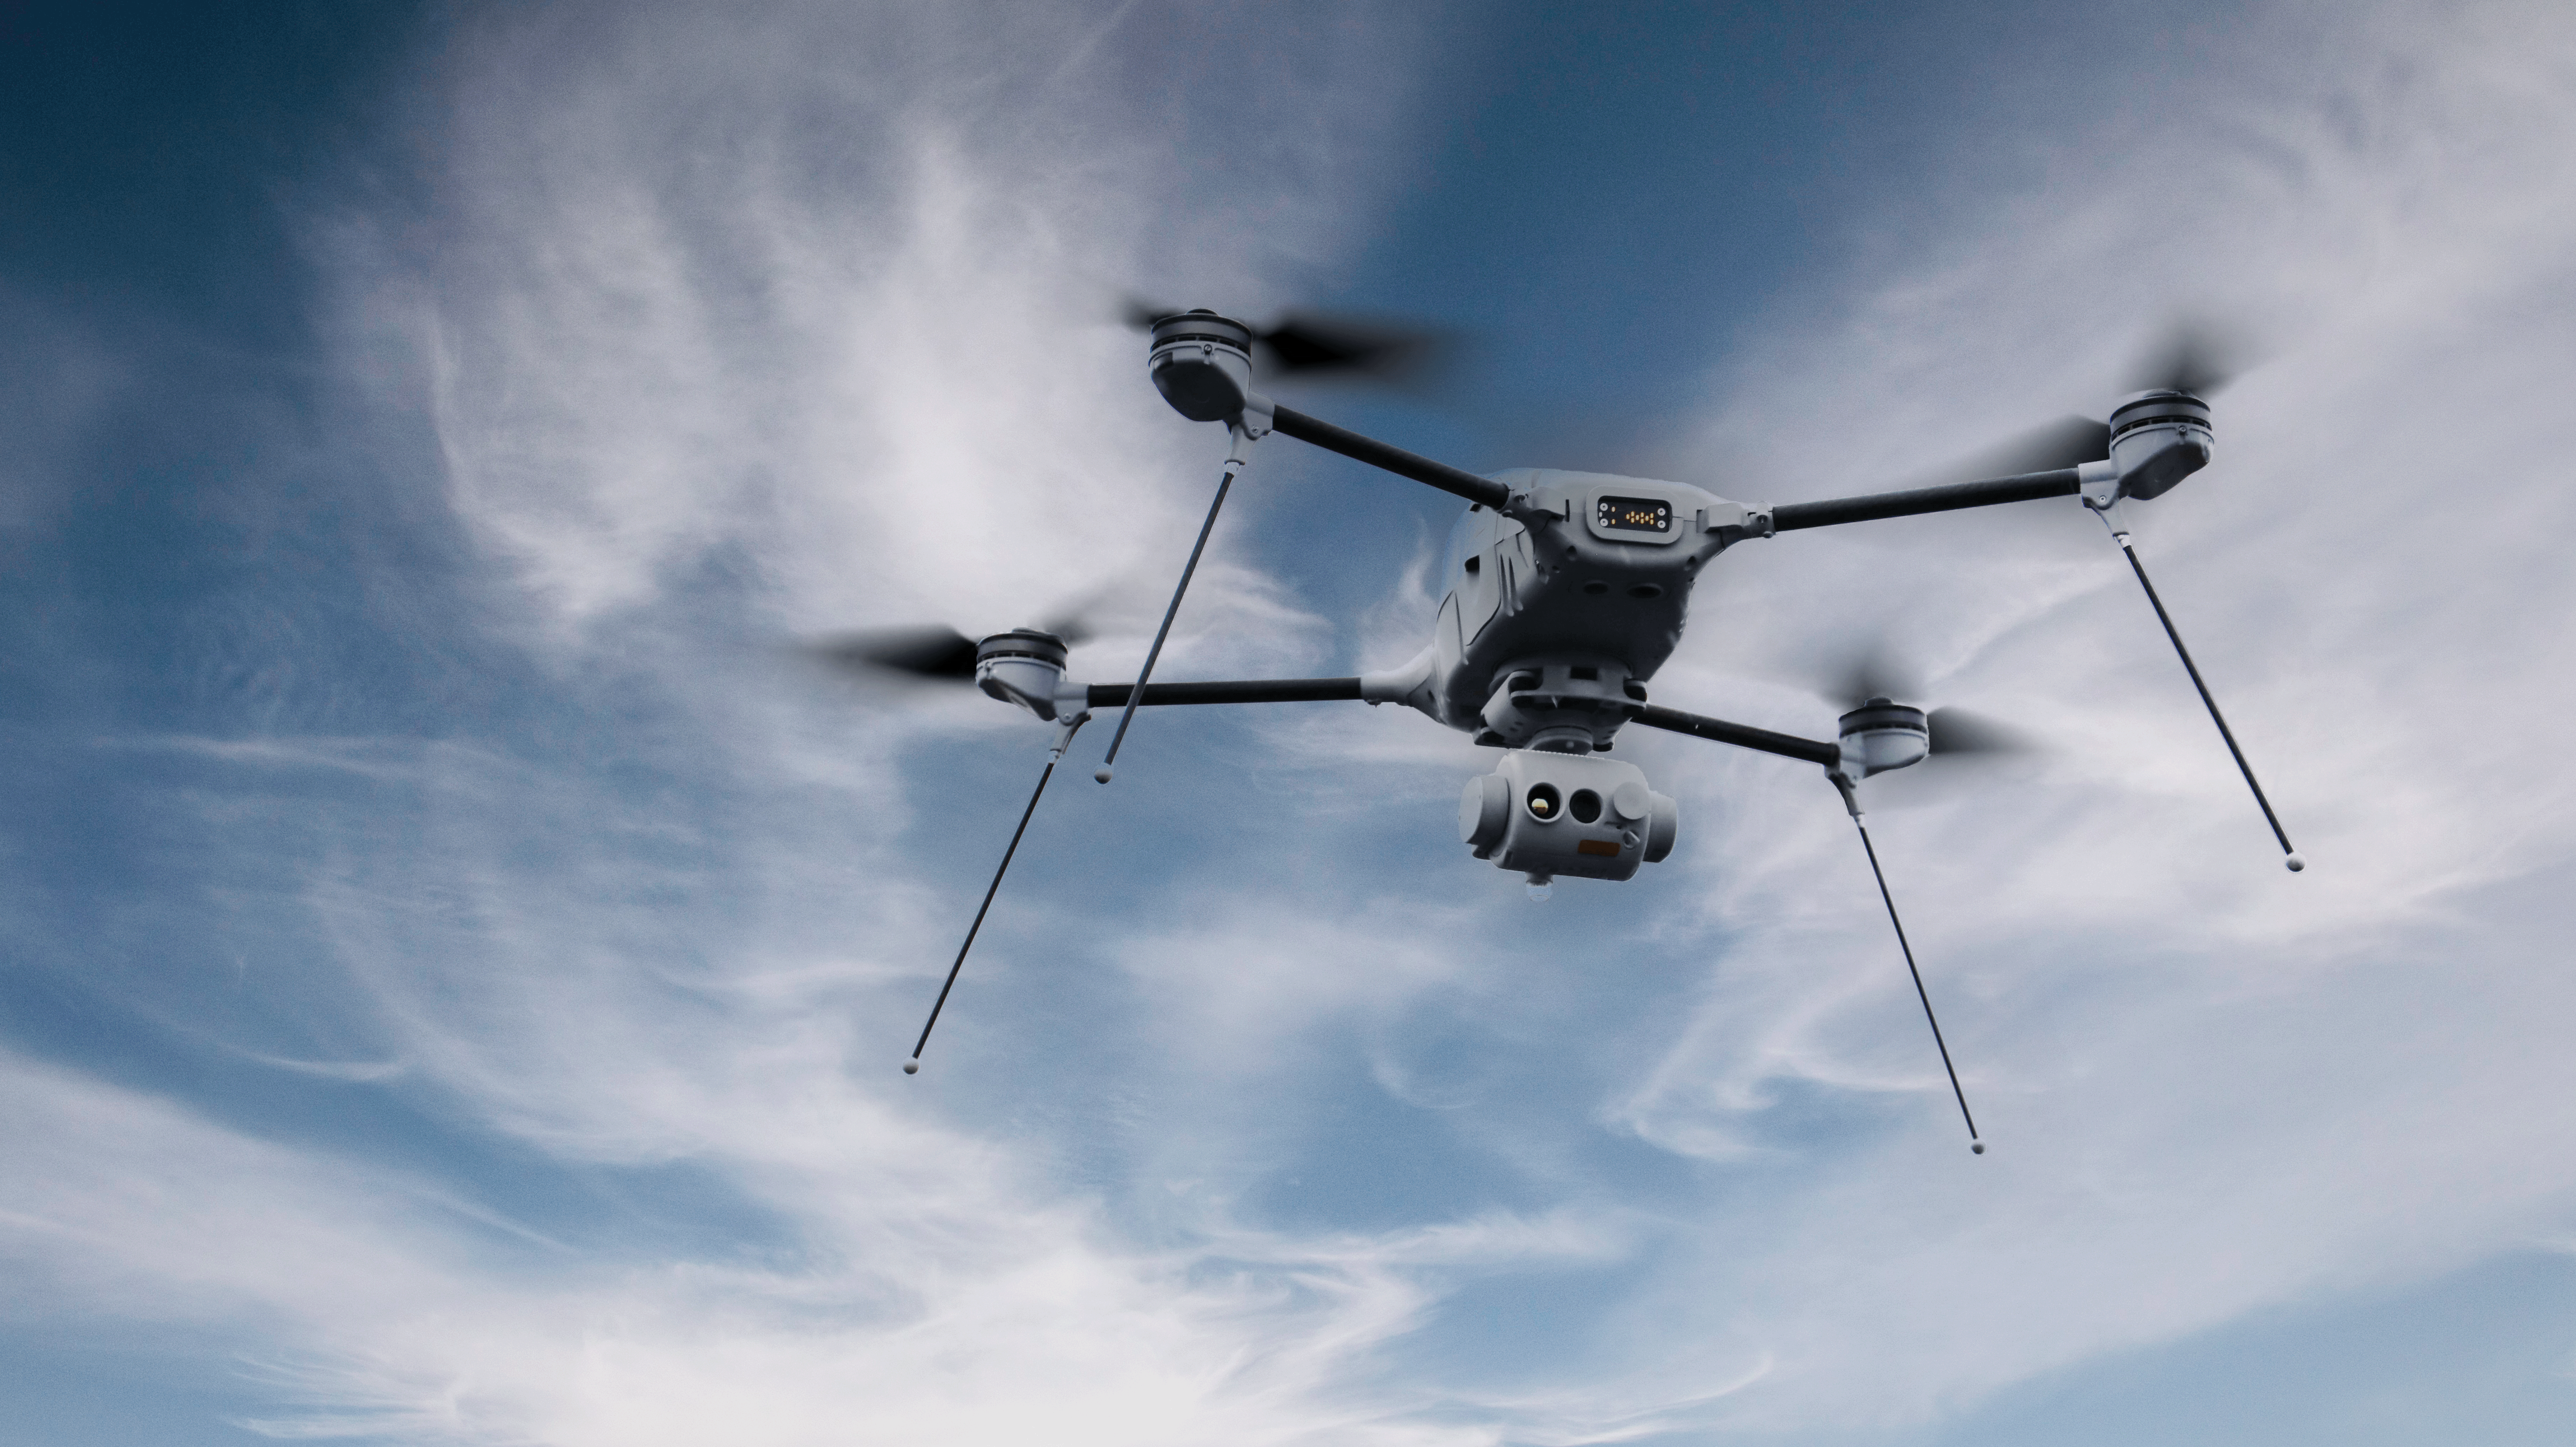 No contracts yet: UK’s plan for thousands of drones for Ukraine in ‘very early stages’